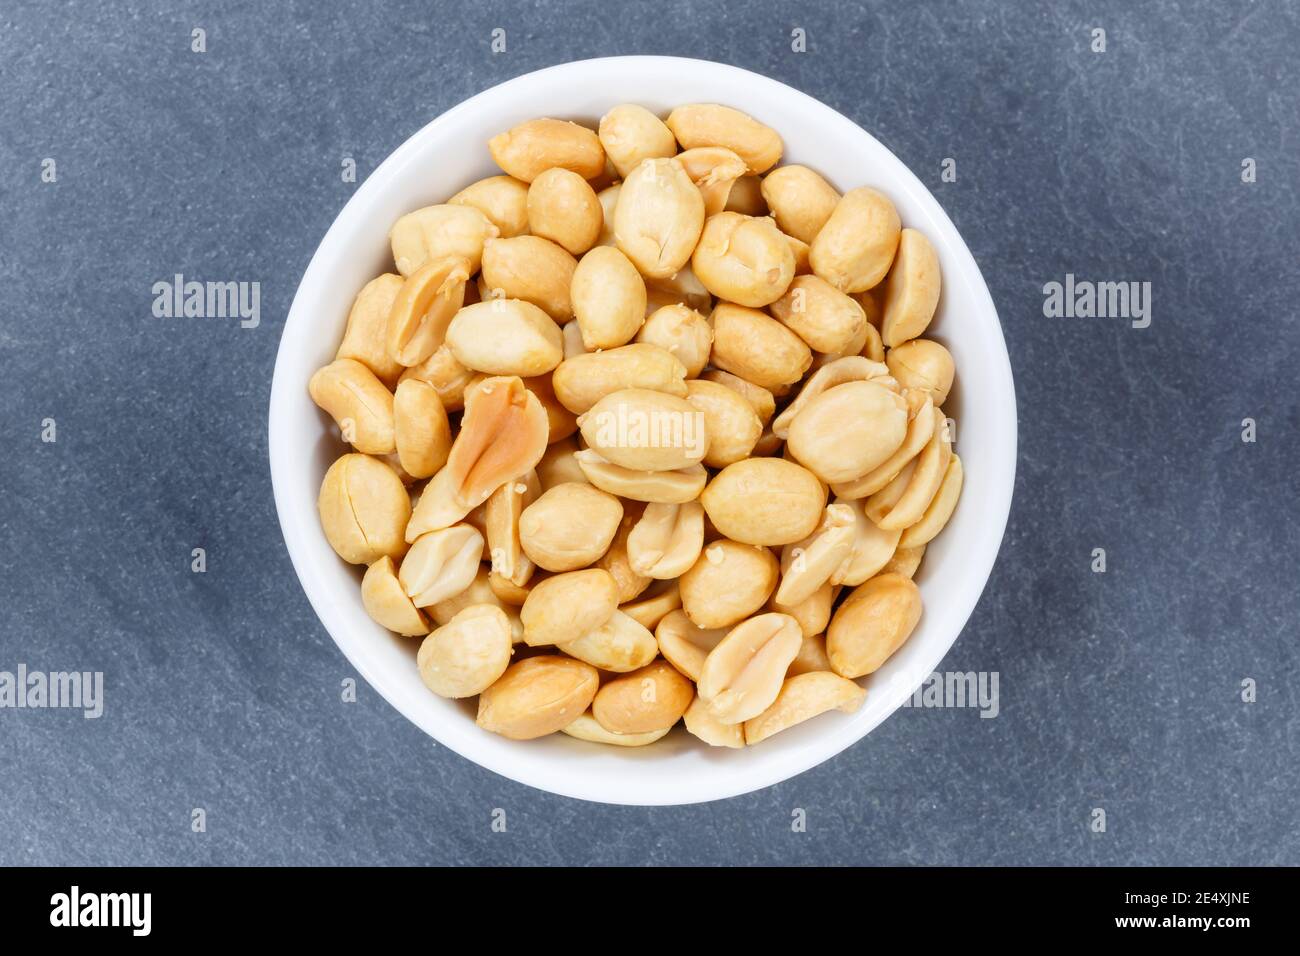 Peanuts nuts from above bowl on a slate Stock Photo